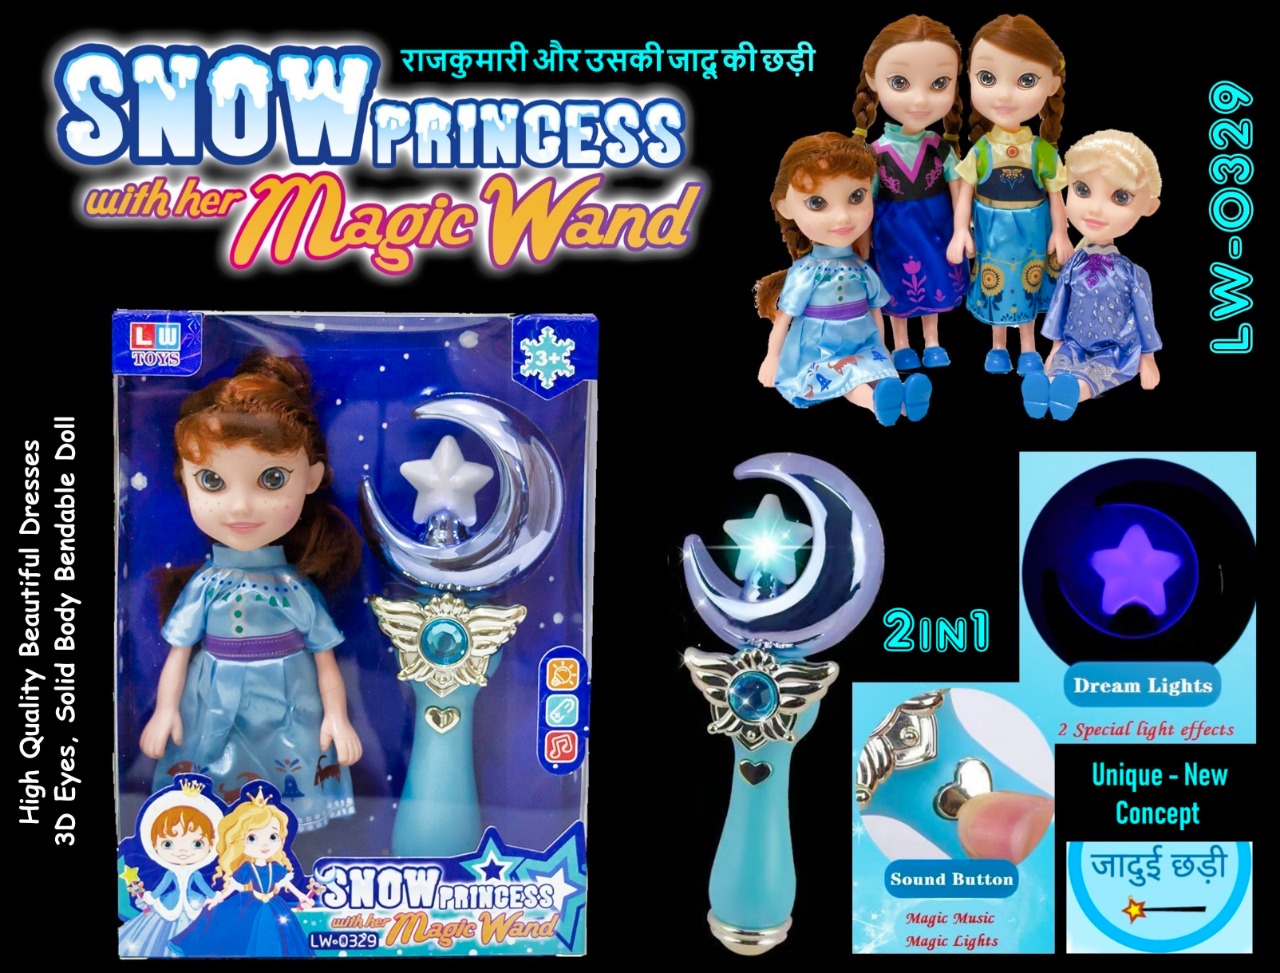 LW-0329 Snow sister with magic wand light and misic | Udaan - B2B Buying  for Retailers